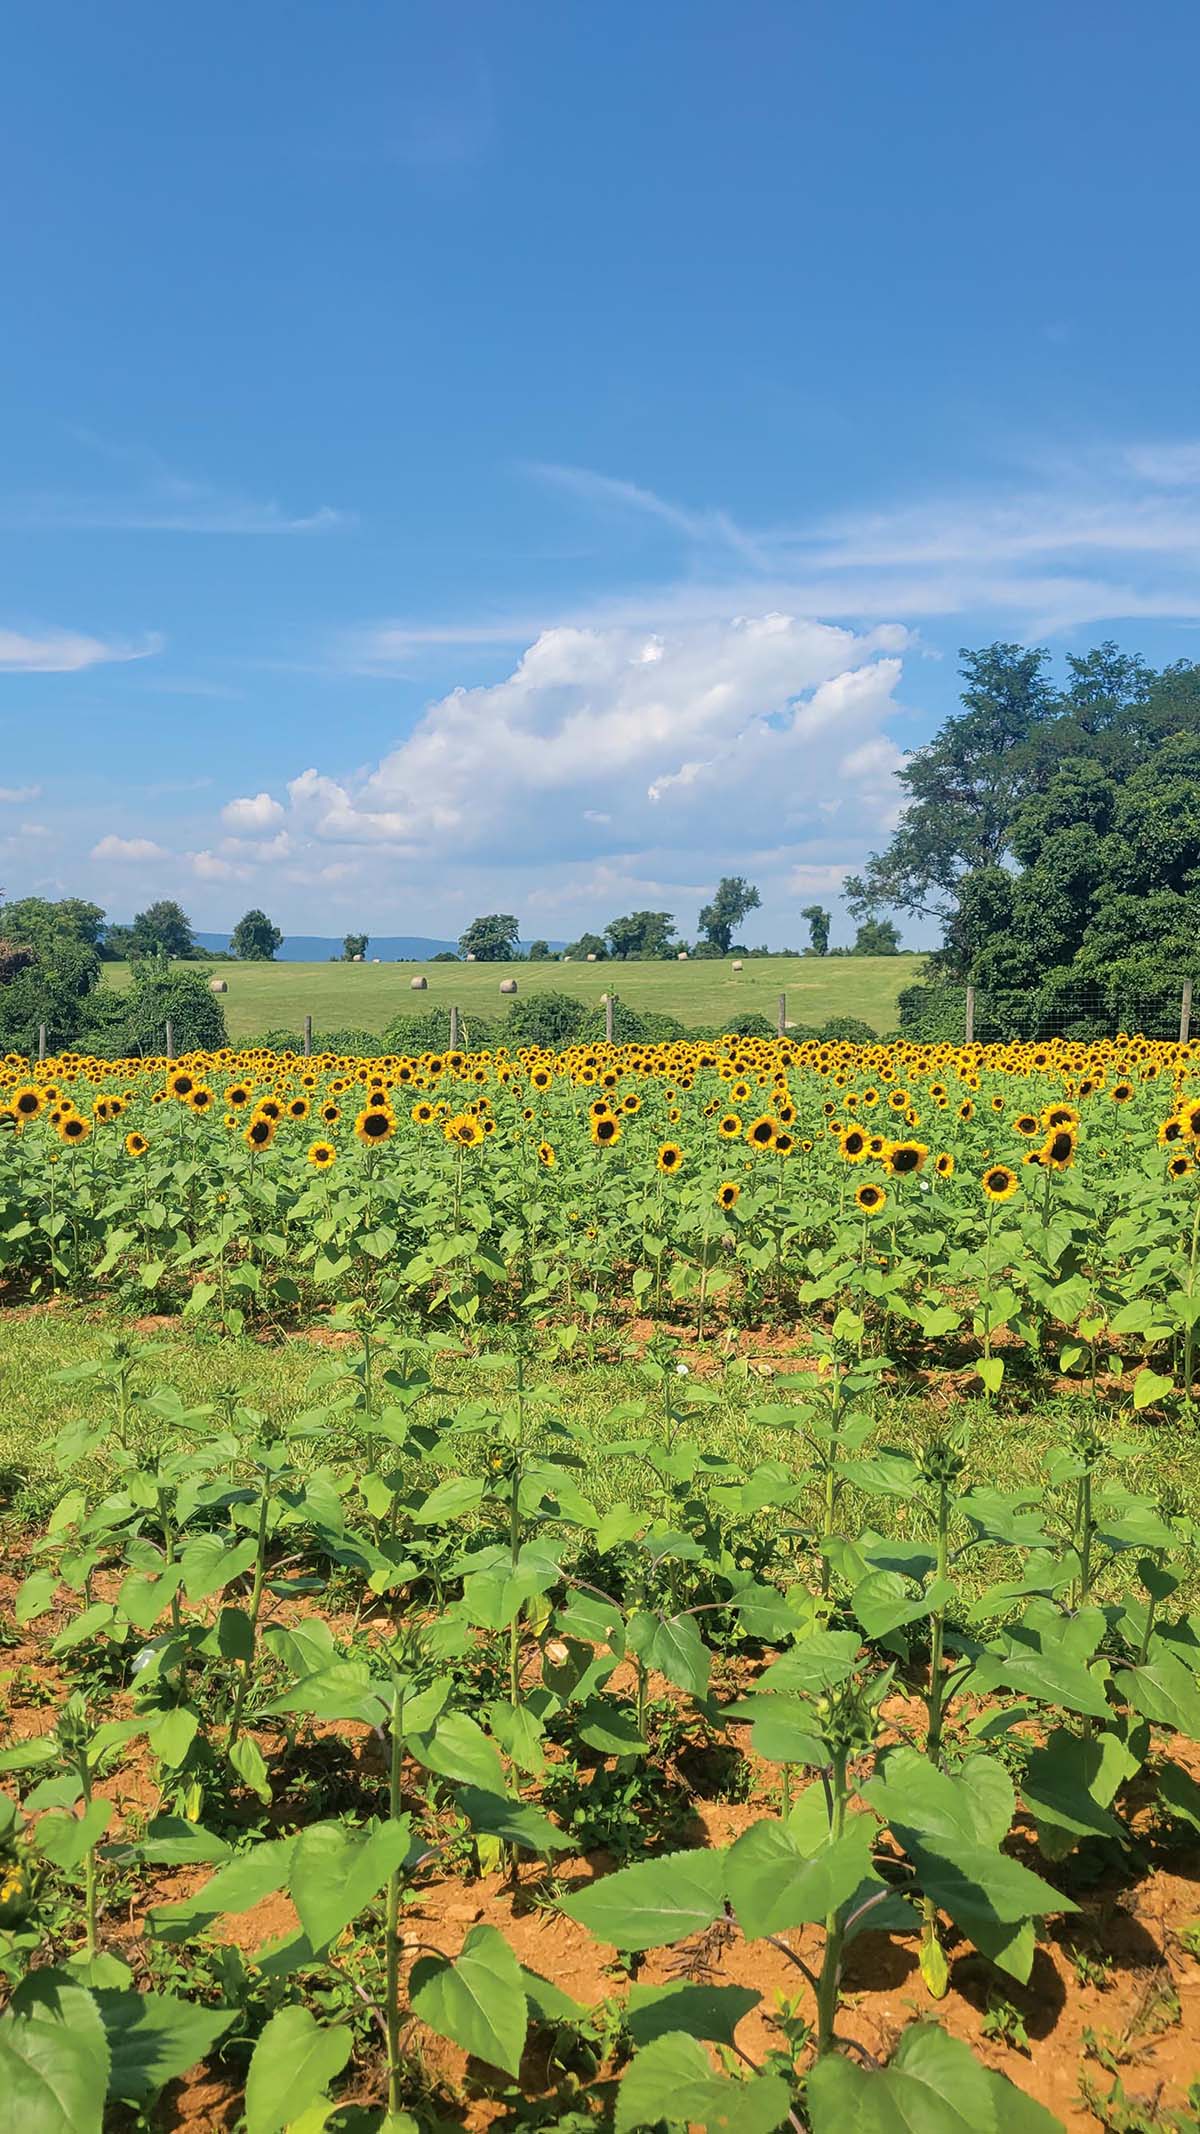 Hundreds of sunflowers in a field under a blue sky.